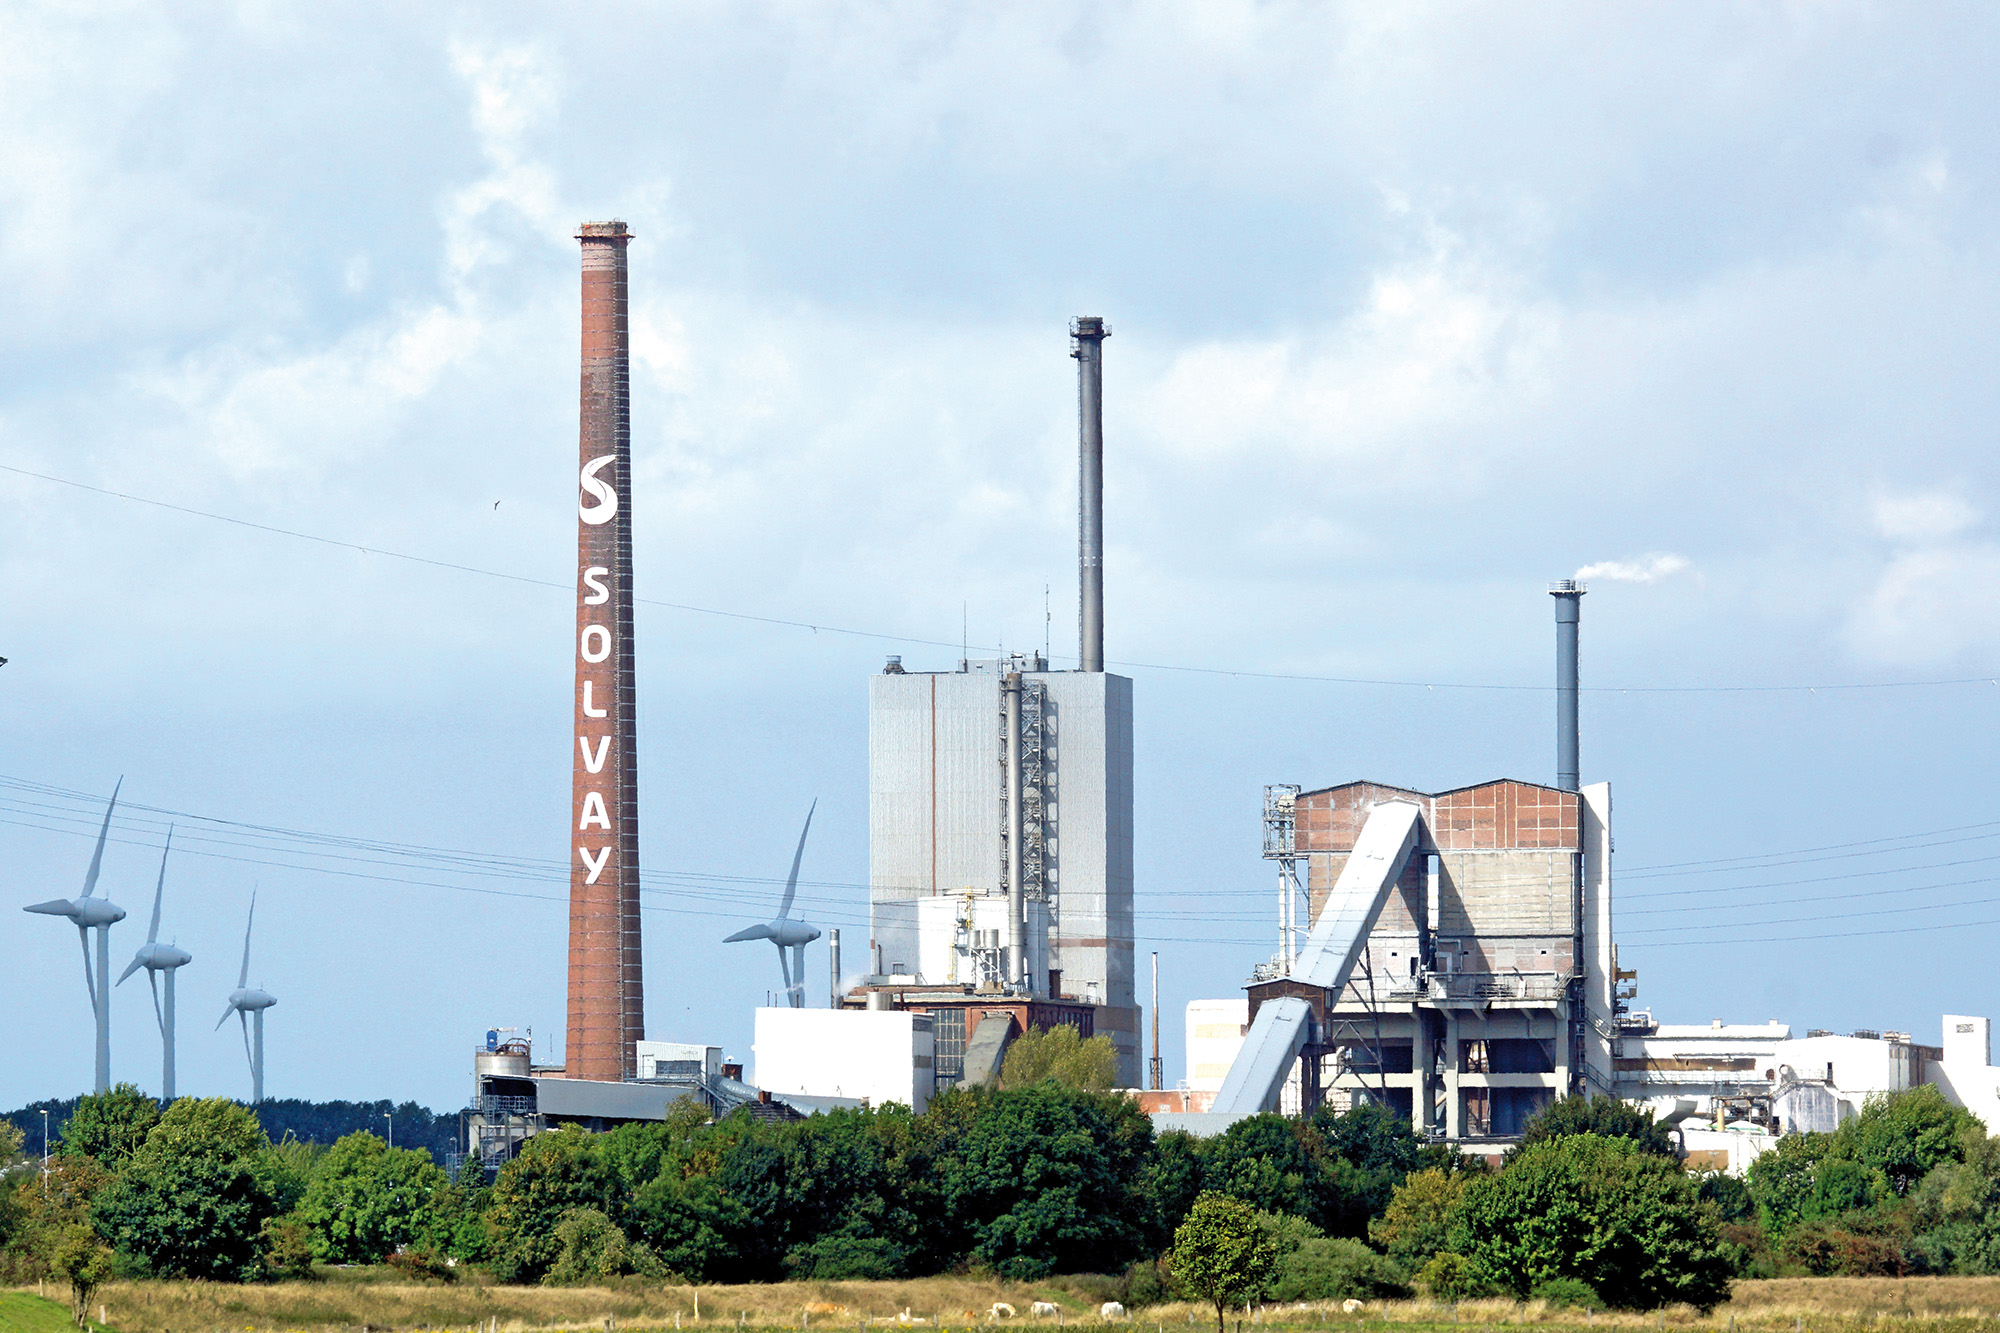 Solvay Plant View to the power station and the soda ash production